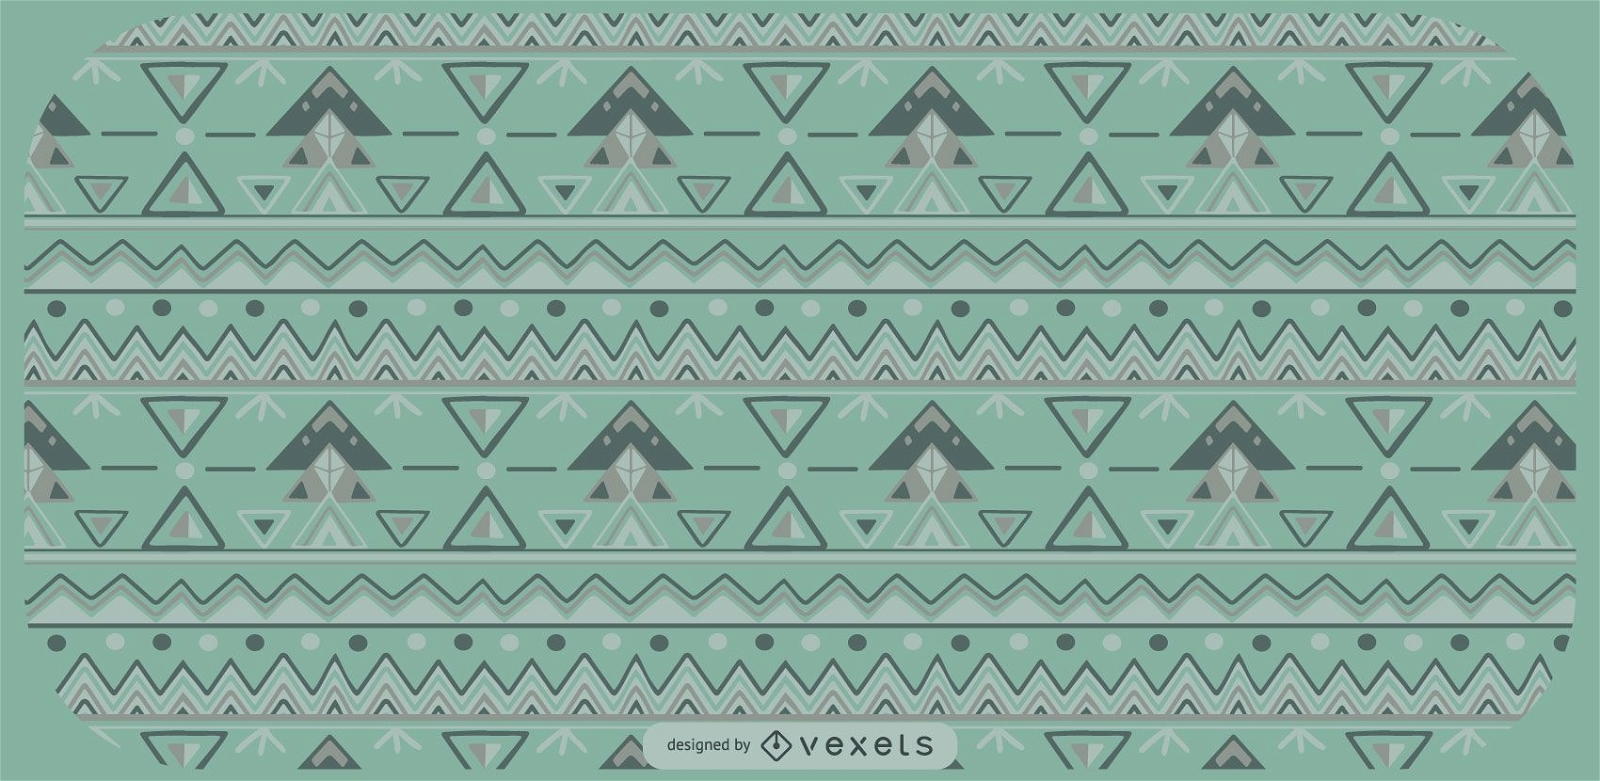 Aztec Triangle Shapes Pattern Design